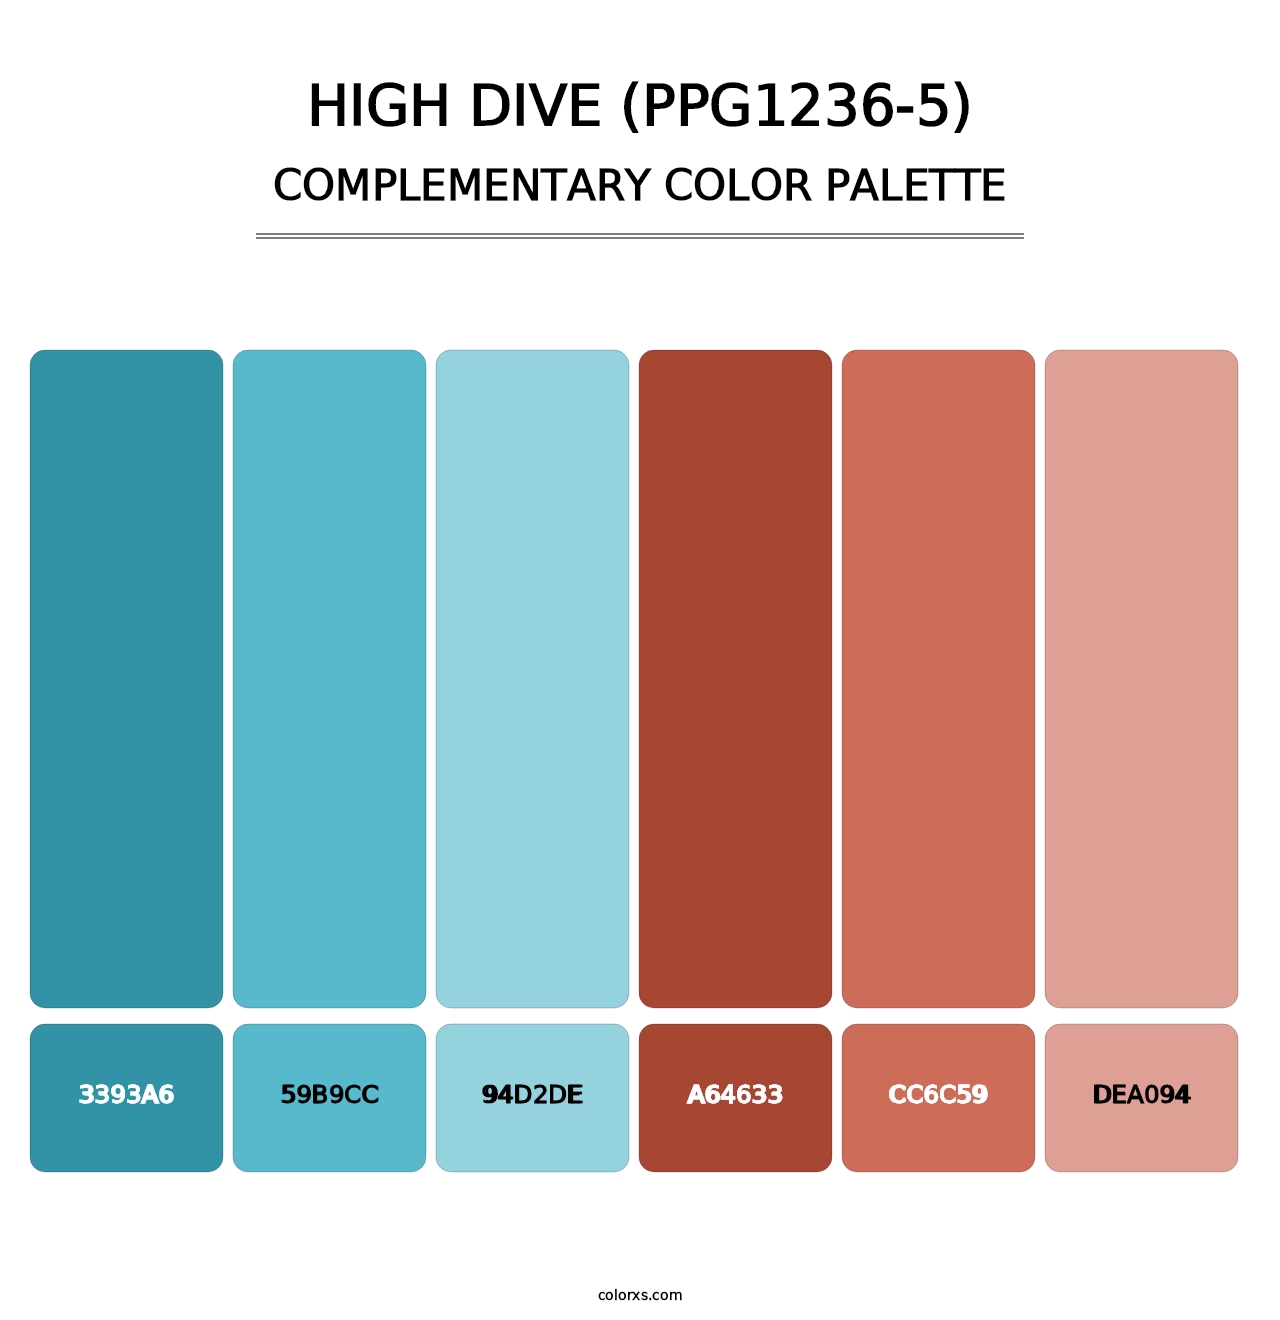 High Dive (PPG1236-5) - Complementary Color Palette